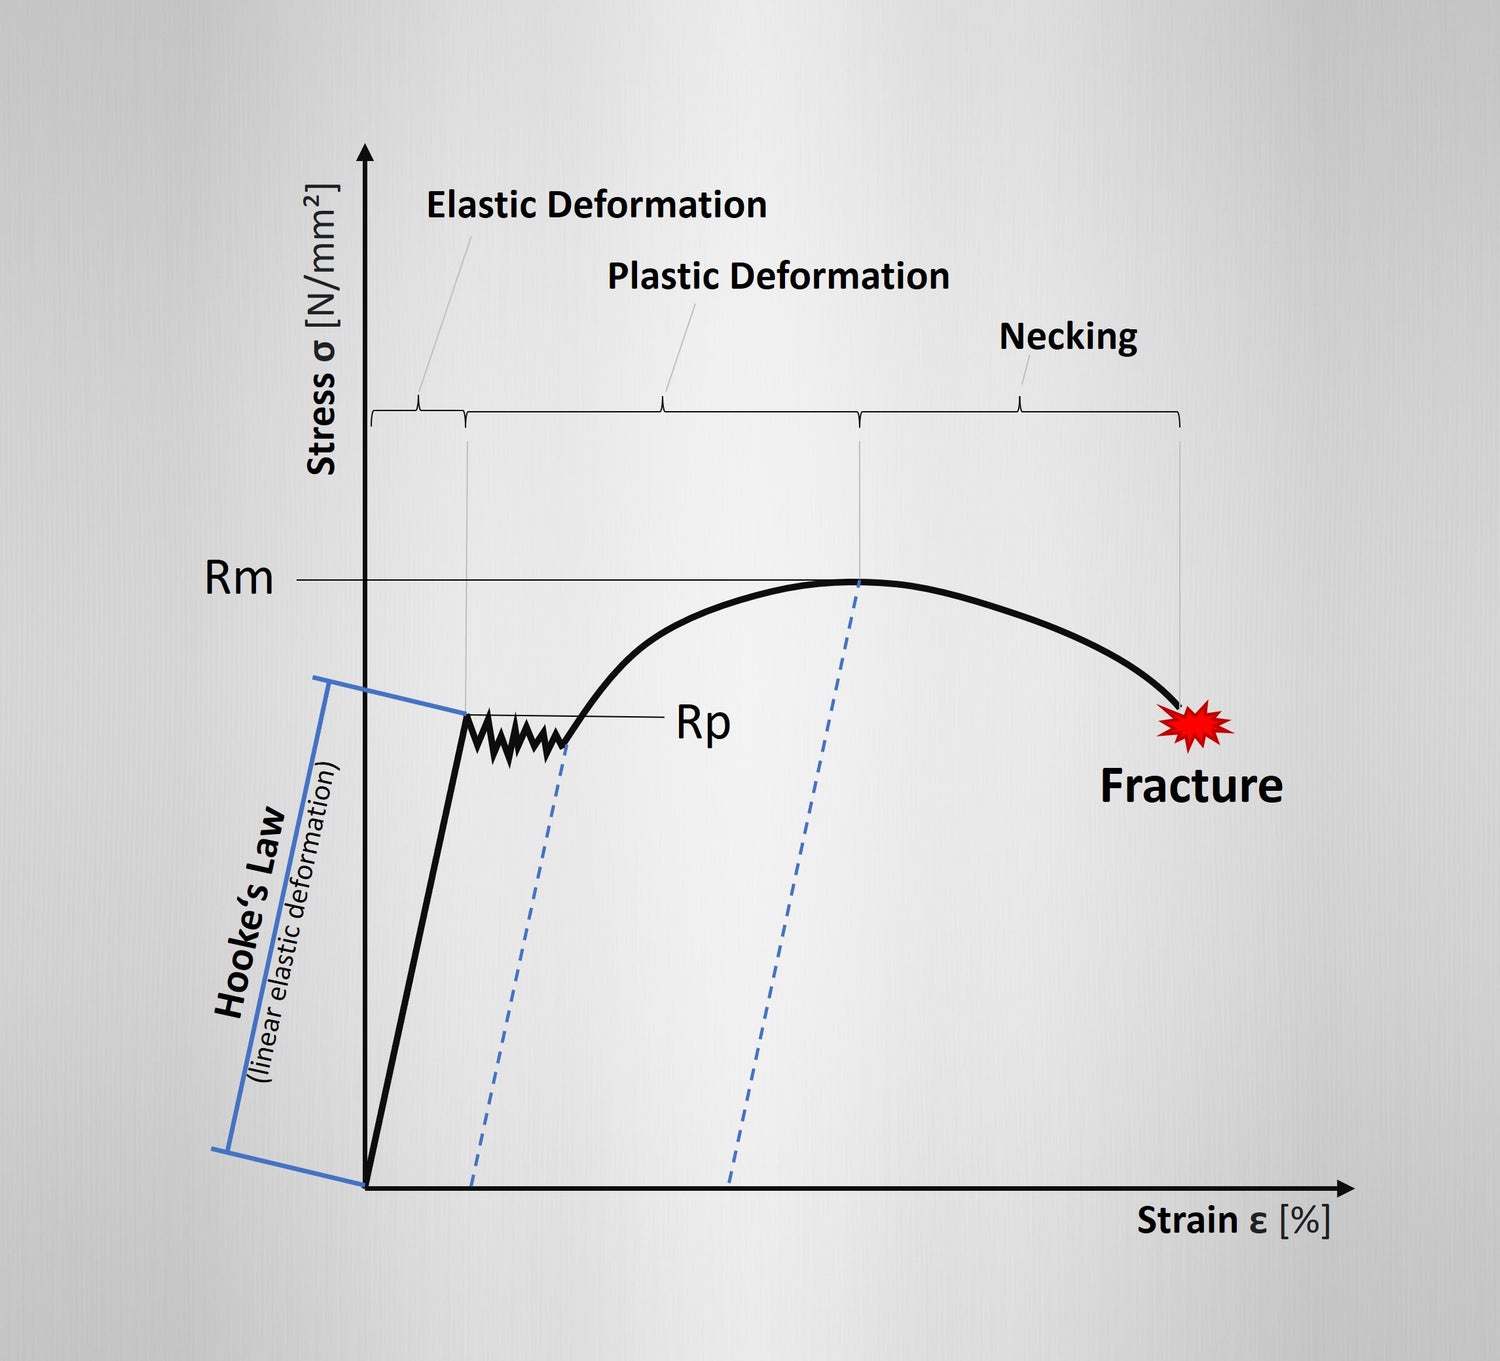 Stress-strain diagram with Hookean region and representation of zones: Elastic Deformation, Plastic Deformation, Necking, and Fracture